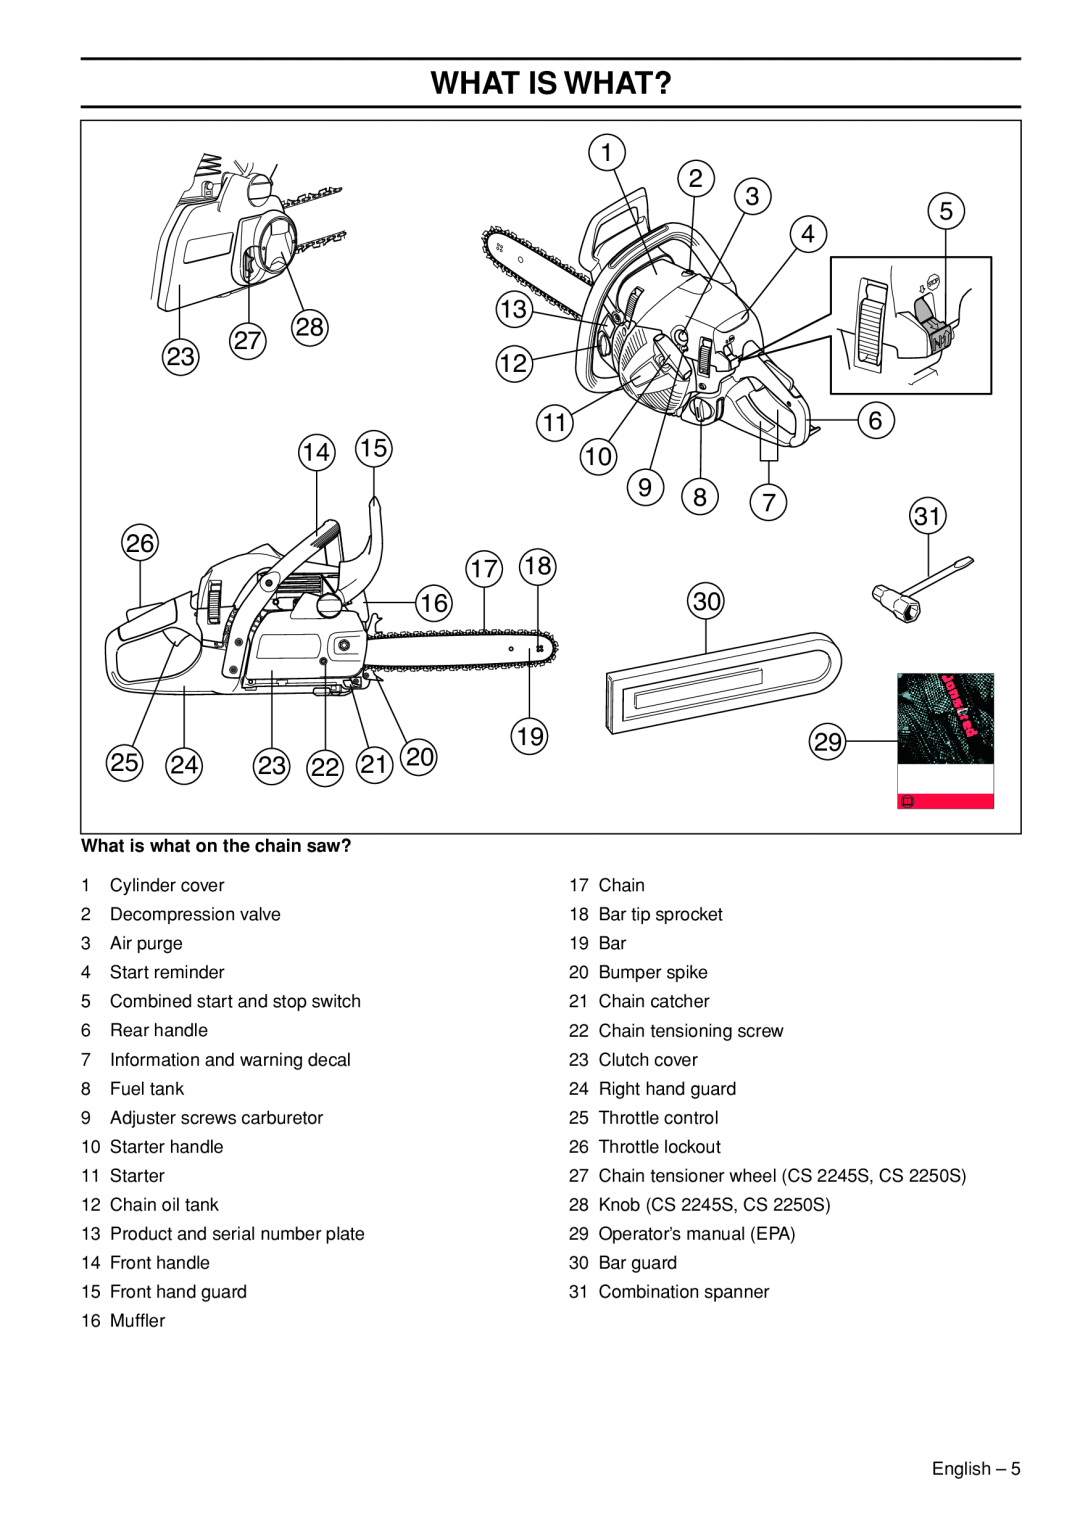 Jonsered CS 2250S, CS 2245S manual What Is What?, What is what on the chain saw? 